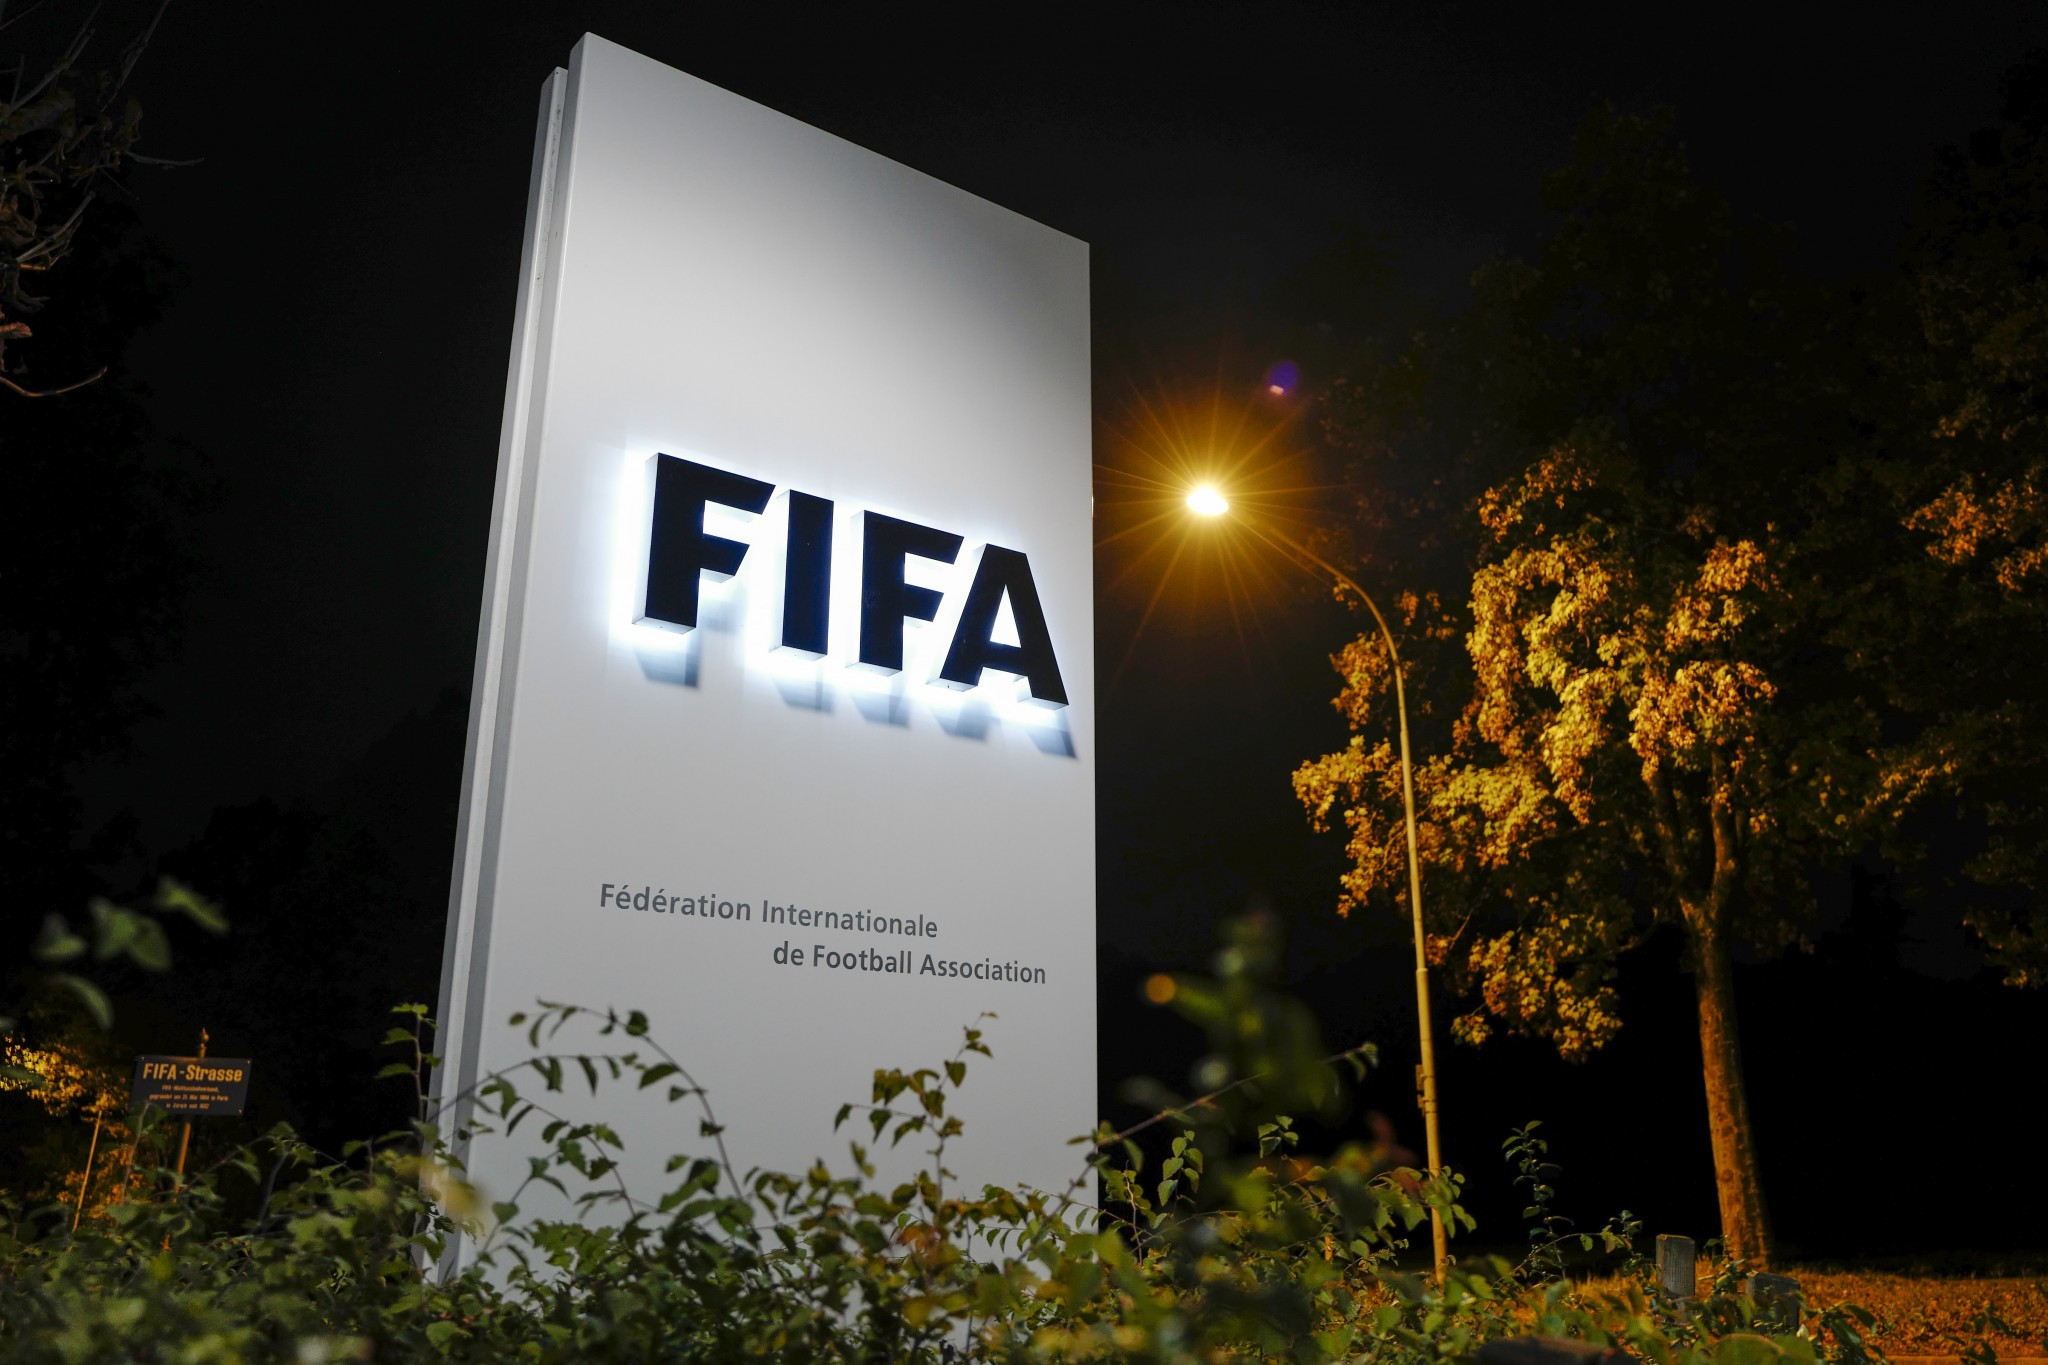 Joseph Weiler has filed an ethics complaint against FIFA ©Getty Images